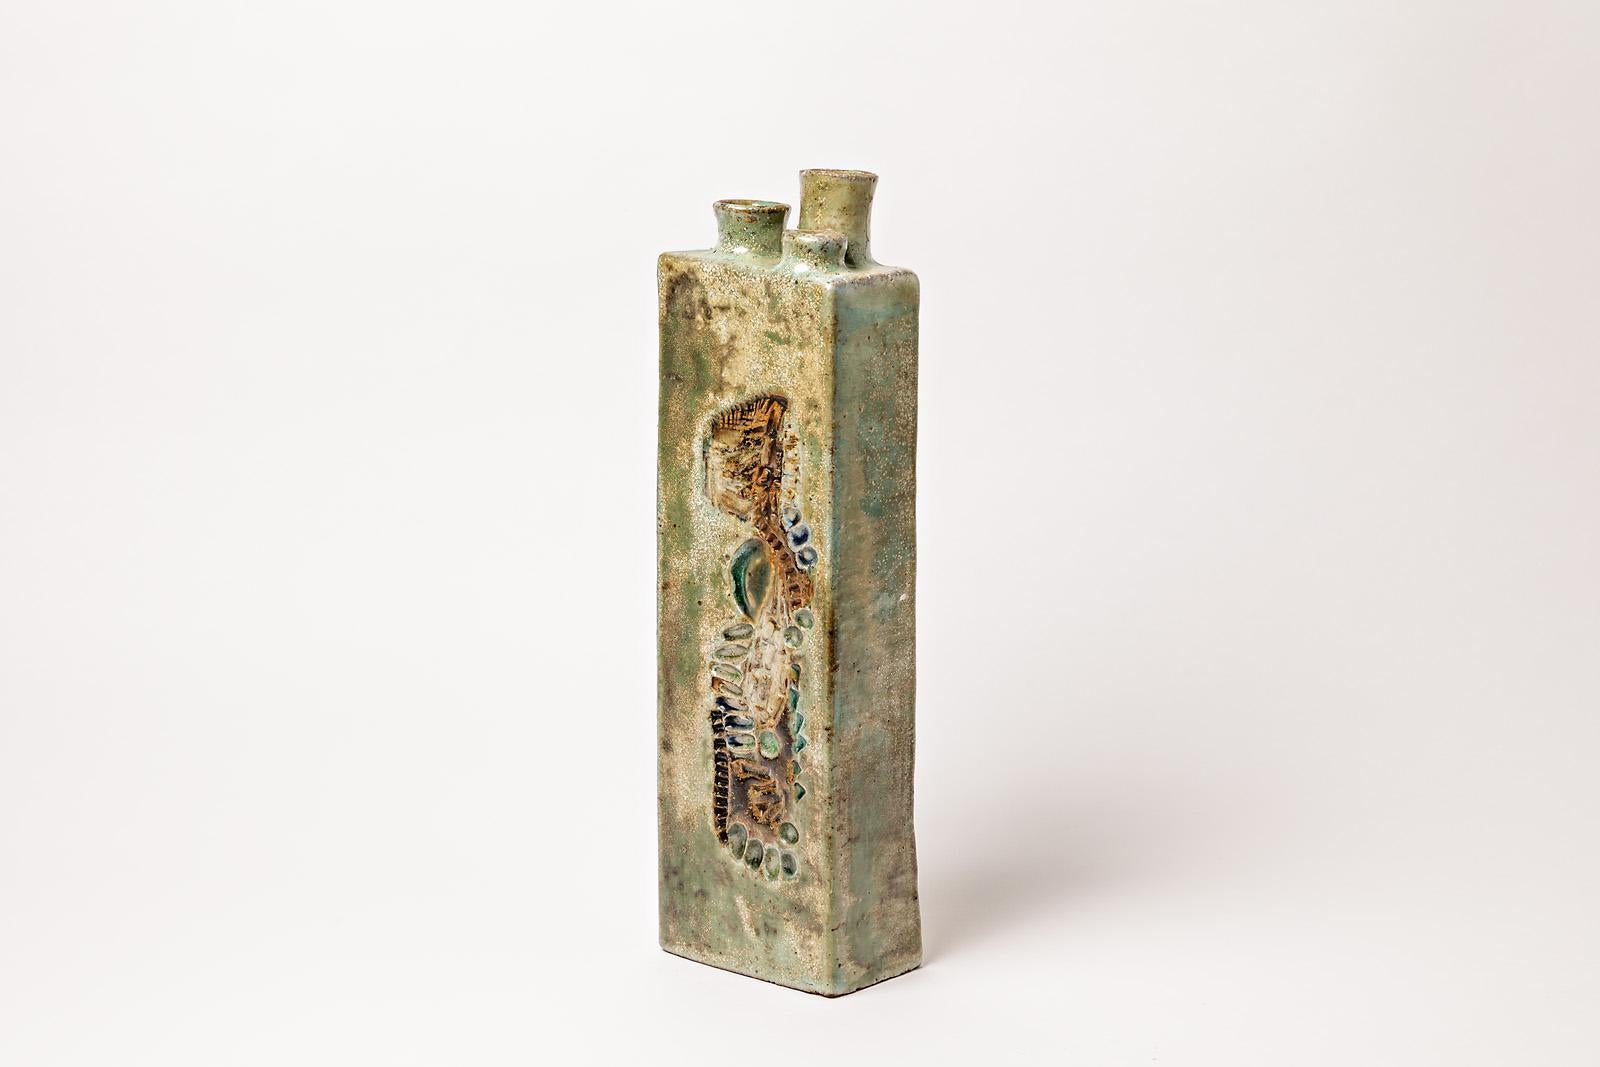 Annie Maume

Important and sculptural 20th midcentury stoneware ceramic vase by the French artist.

Elegant green colors and abstract decoration.

Signed under the base

Perfect condition

Dimensions: 39 x 11 x 7cm.